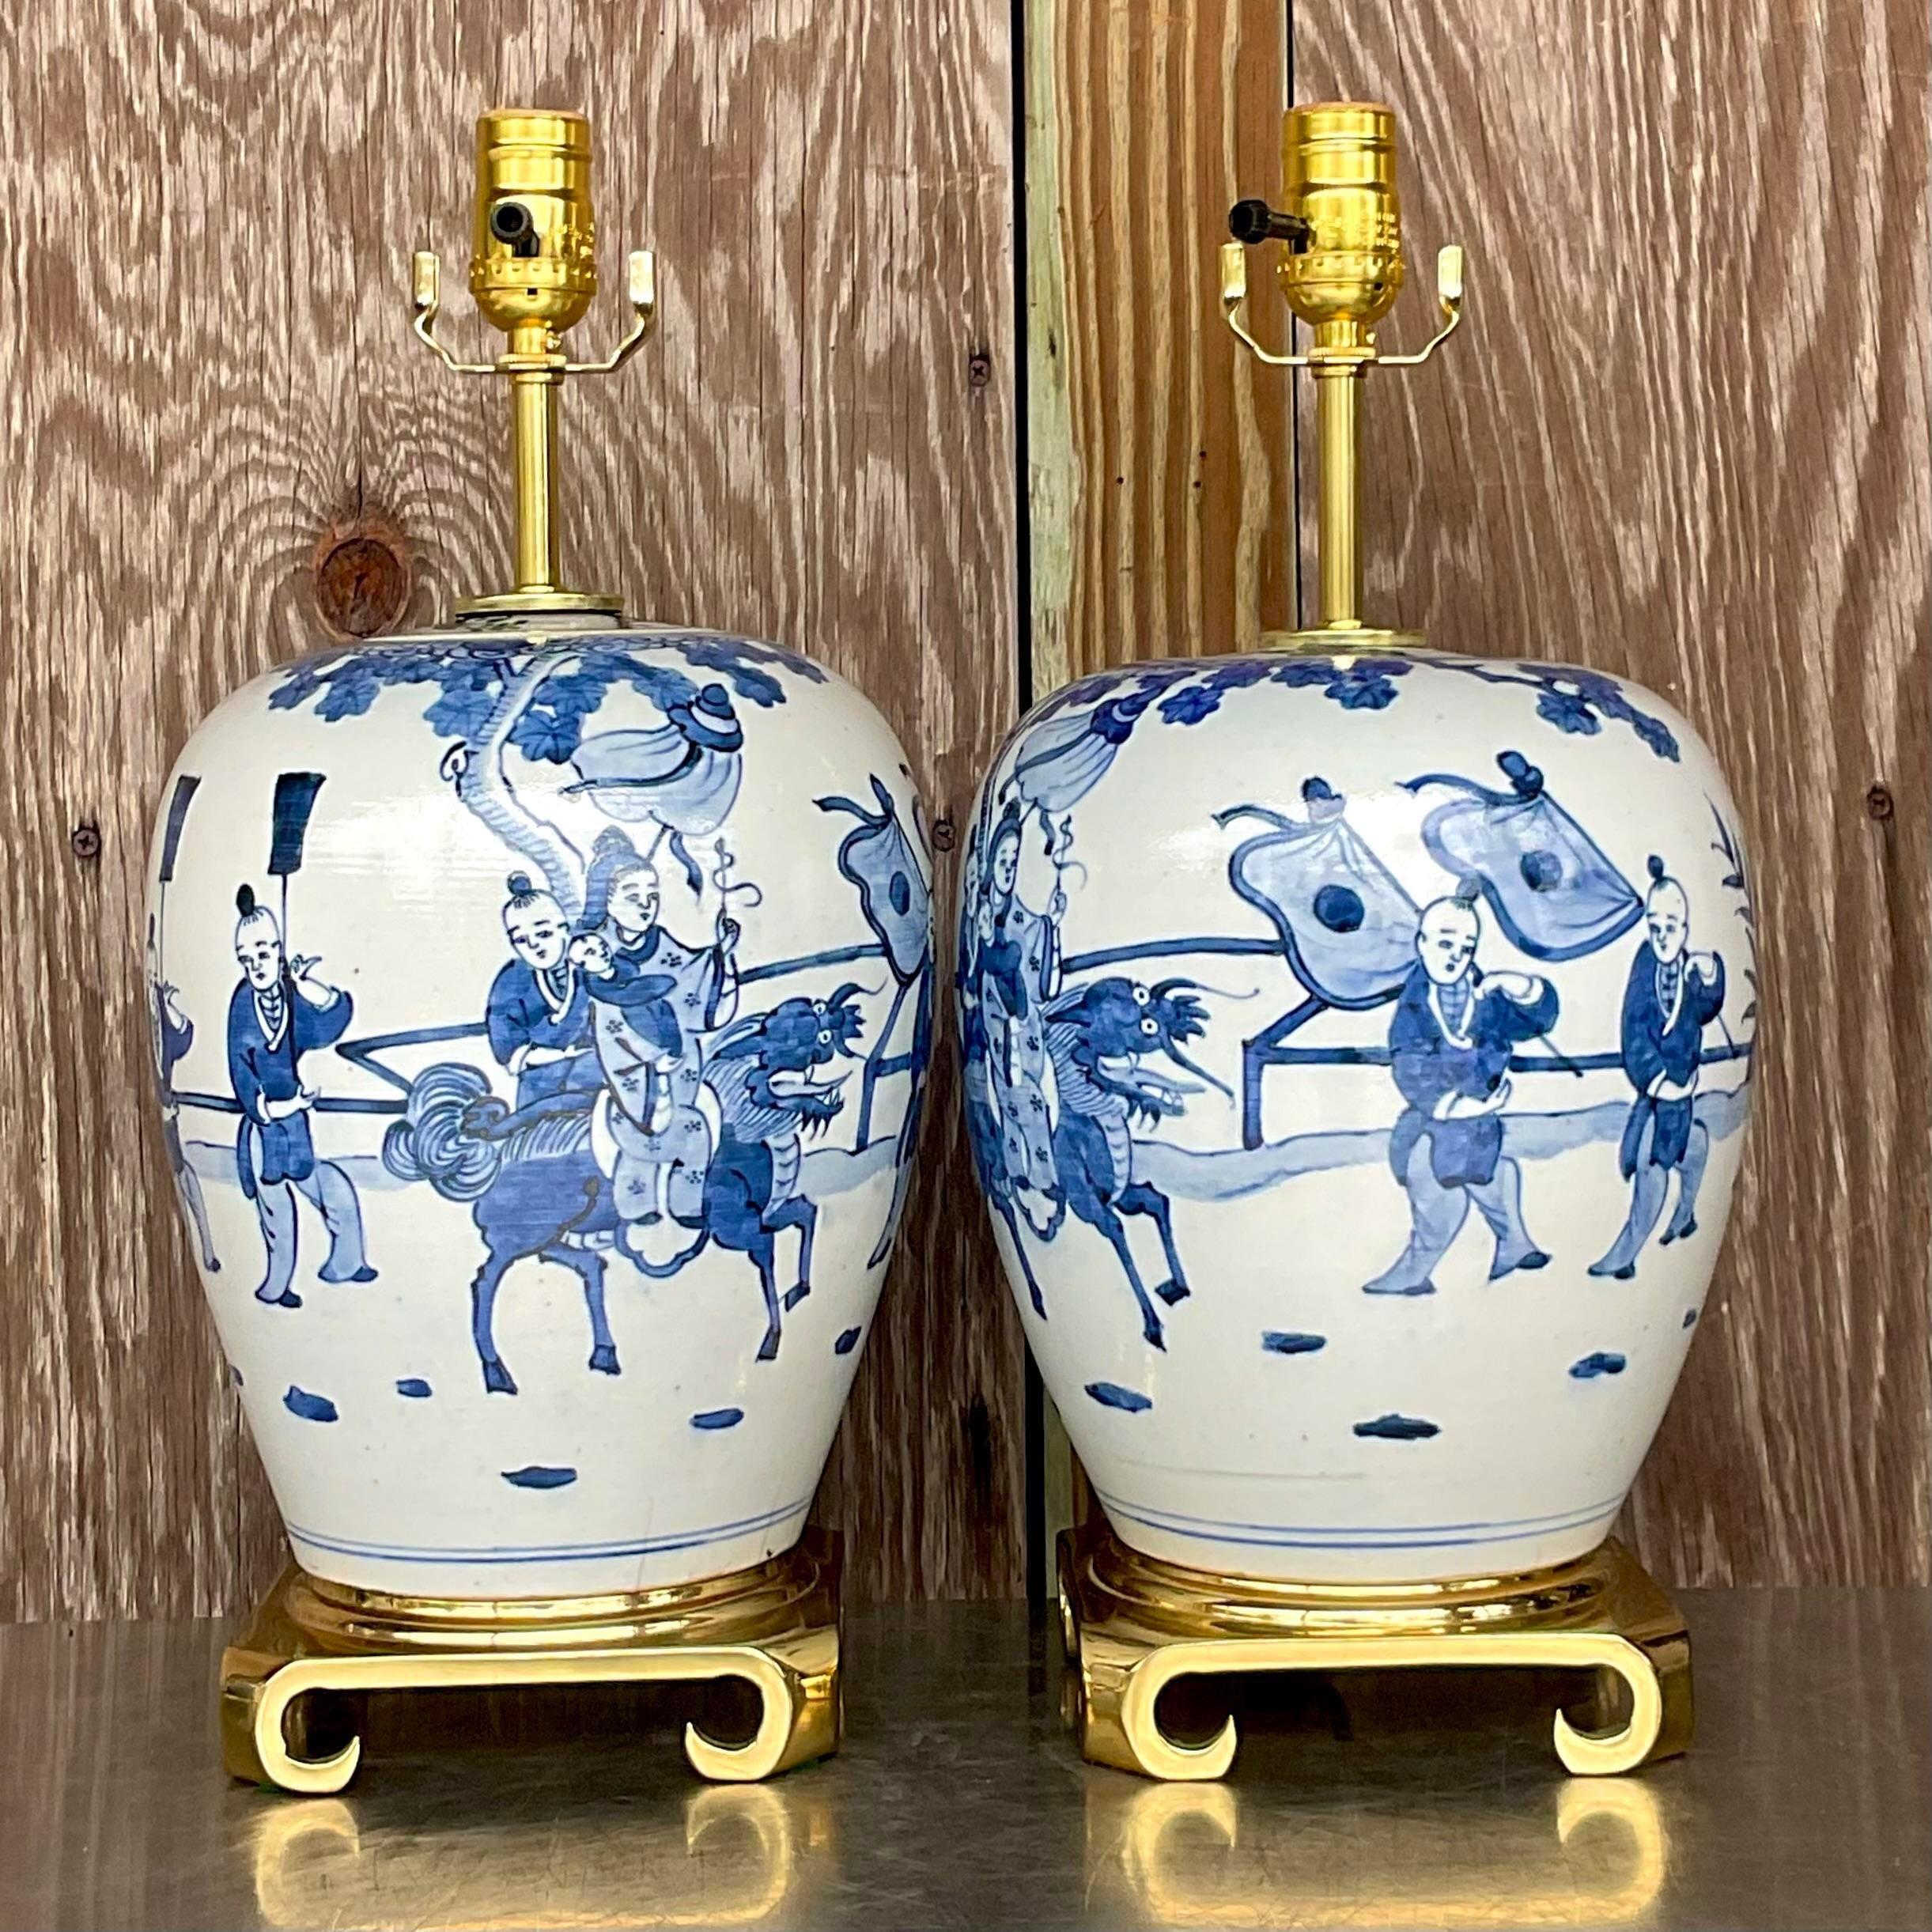 A fabulous pair of vintage Asian table lamps. A gorgeous glazed ceramic in a classic blue and white motif. A gorgeous hand painted pastoral design. Fully restored with all new hardware, wiring and brass scroll plinths. Acquired from a Palm Beach